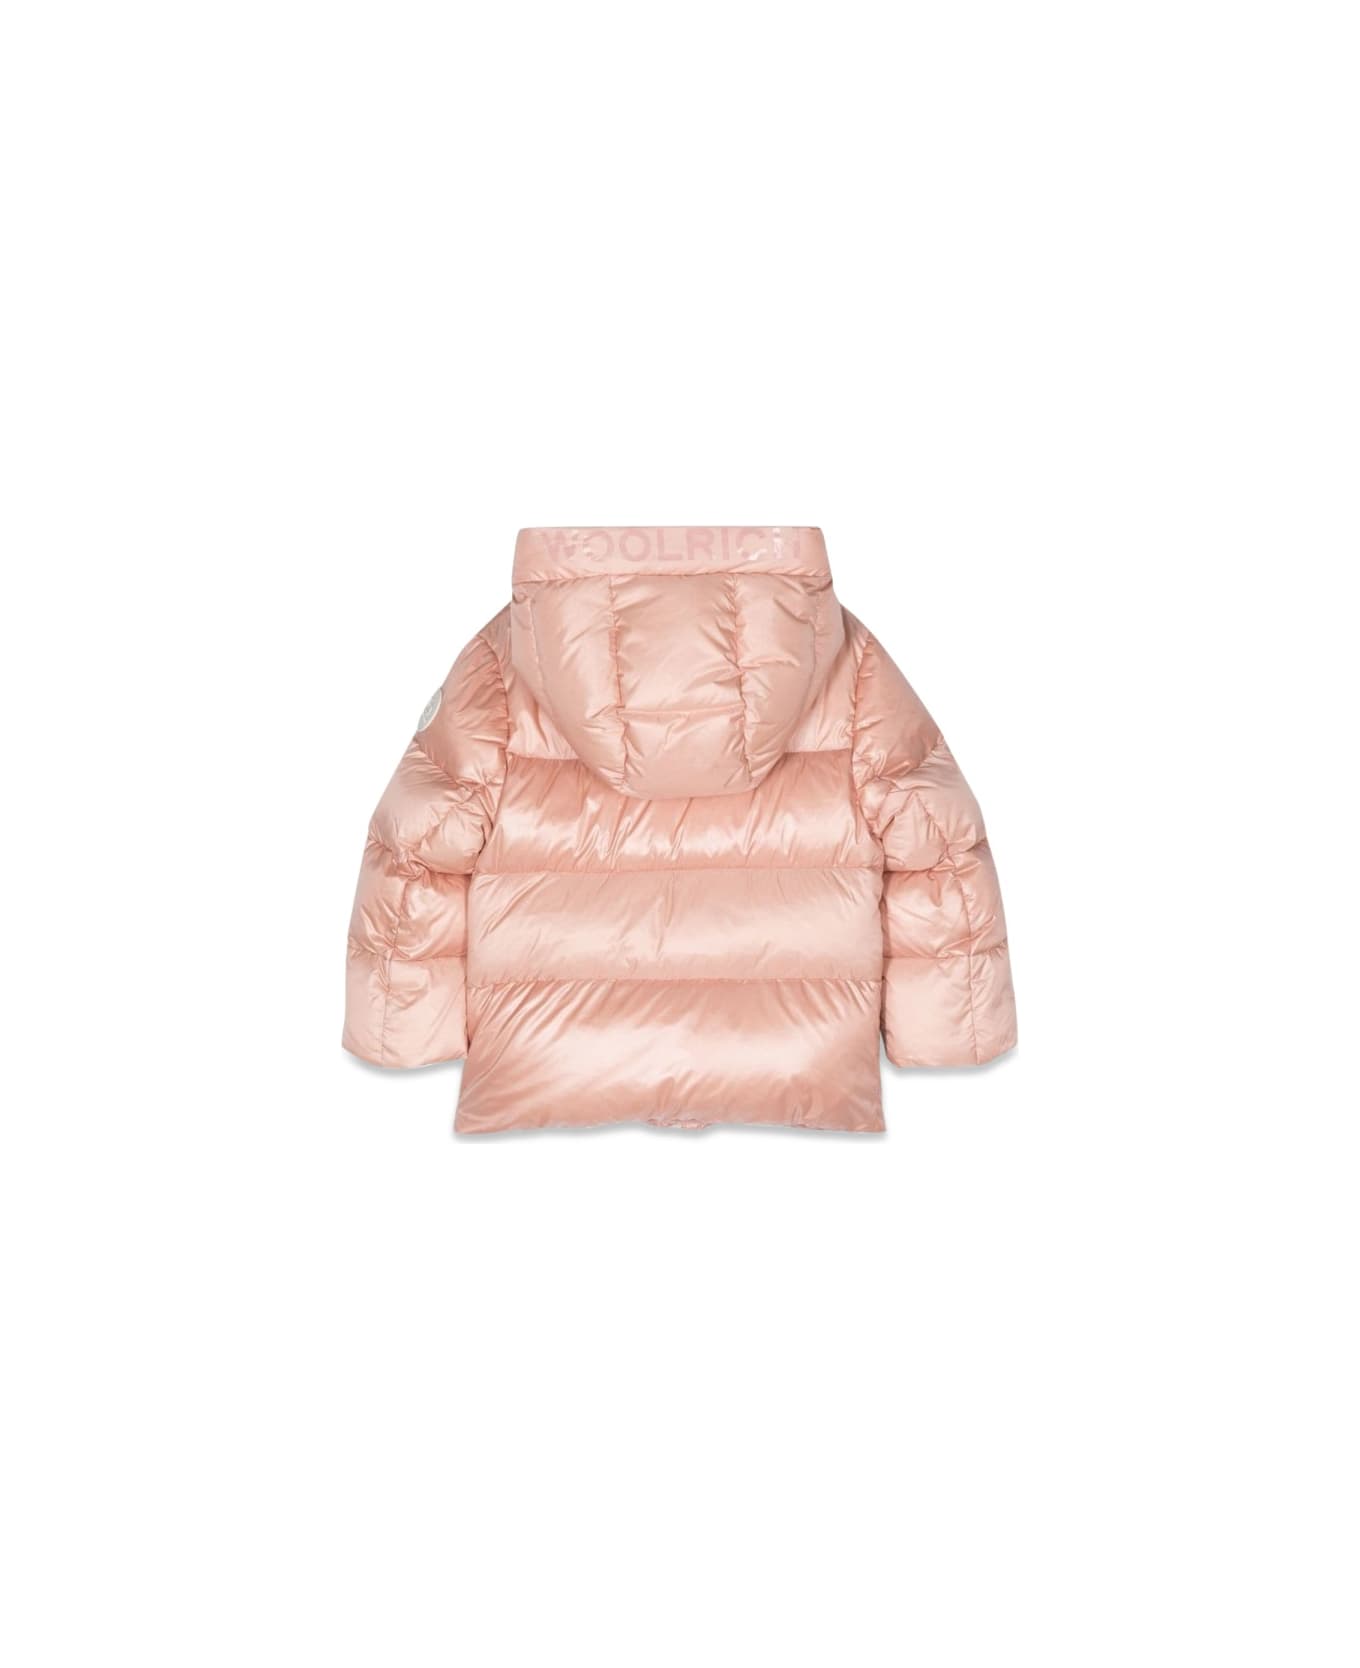 Woolrich Quilted Glossy Jacket - PINK